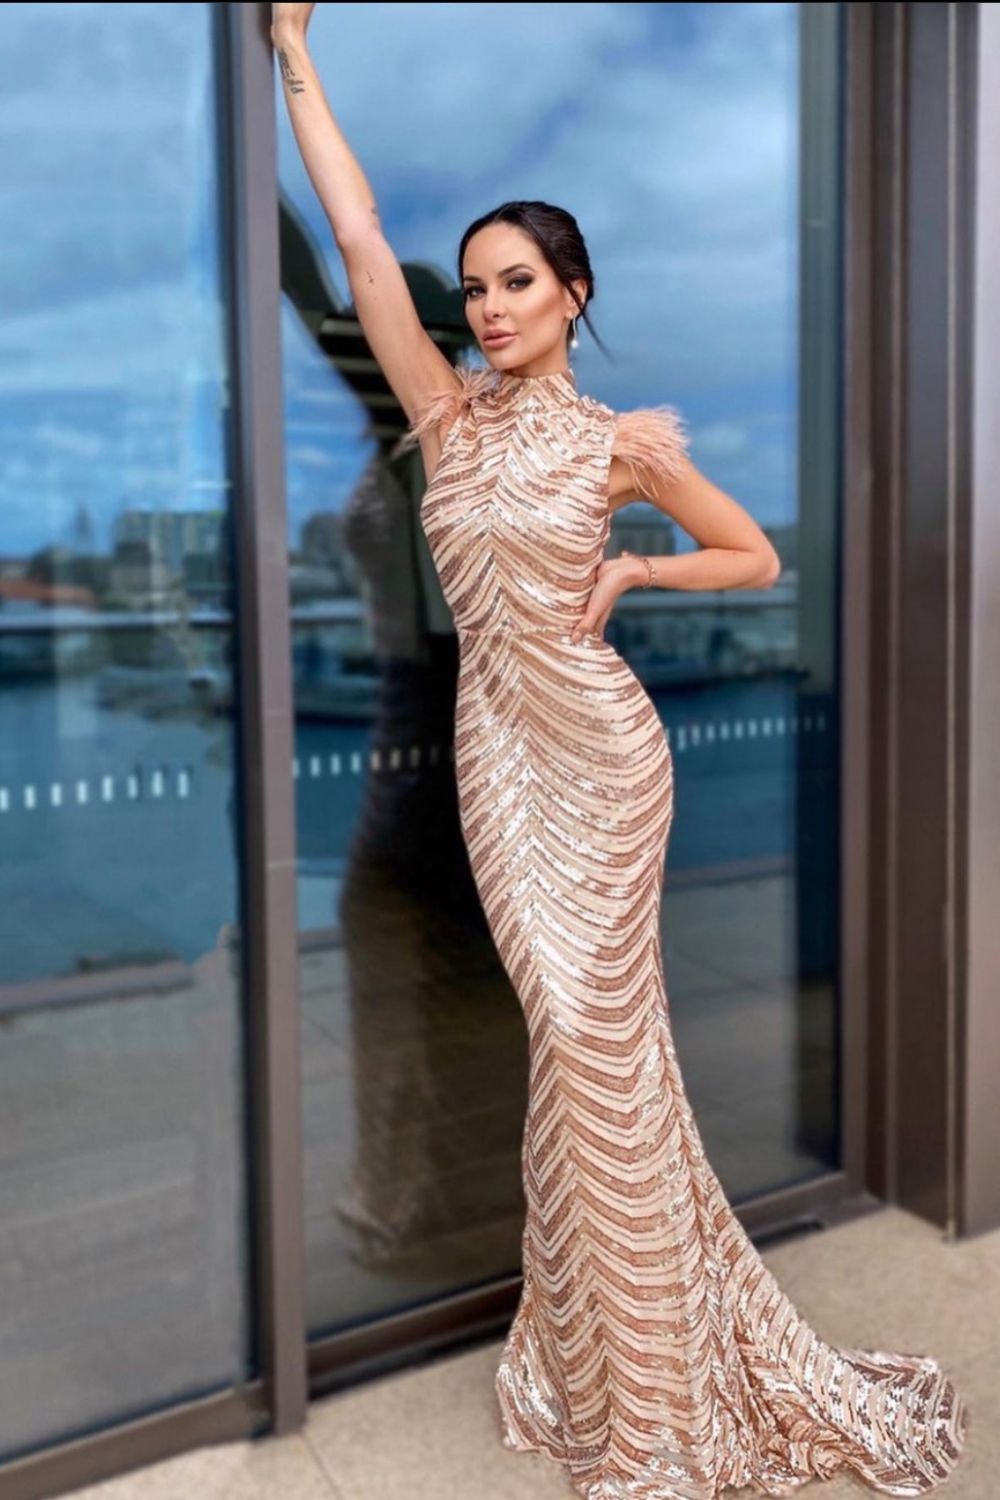 Power Vip Rose Gold Luxe Feather Shoulder Sequin Illusion Maxi Dress